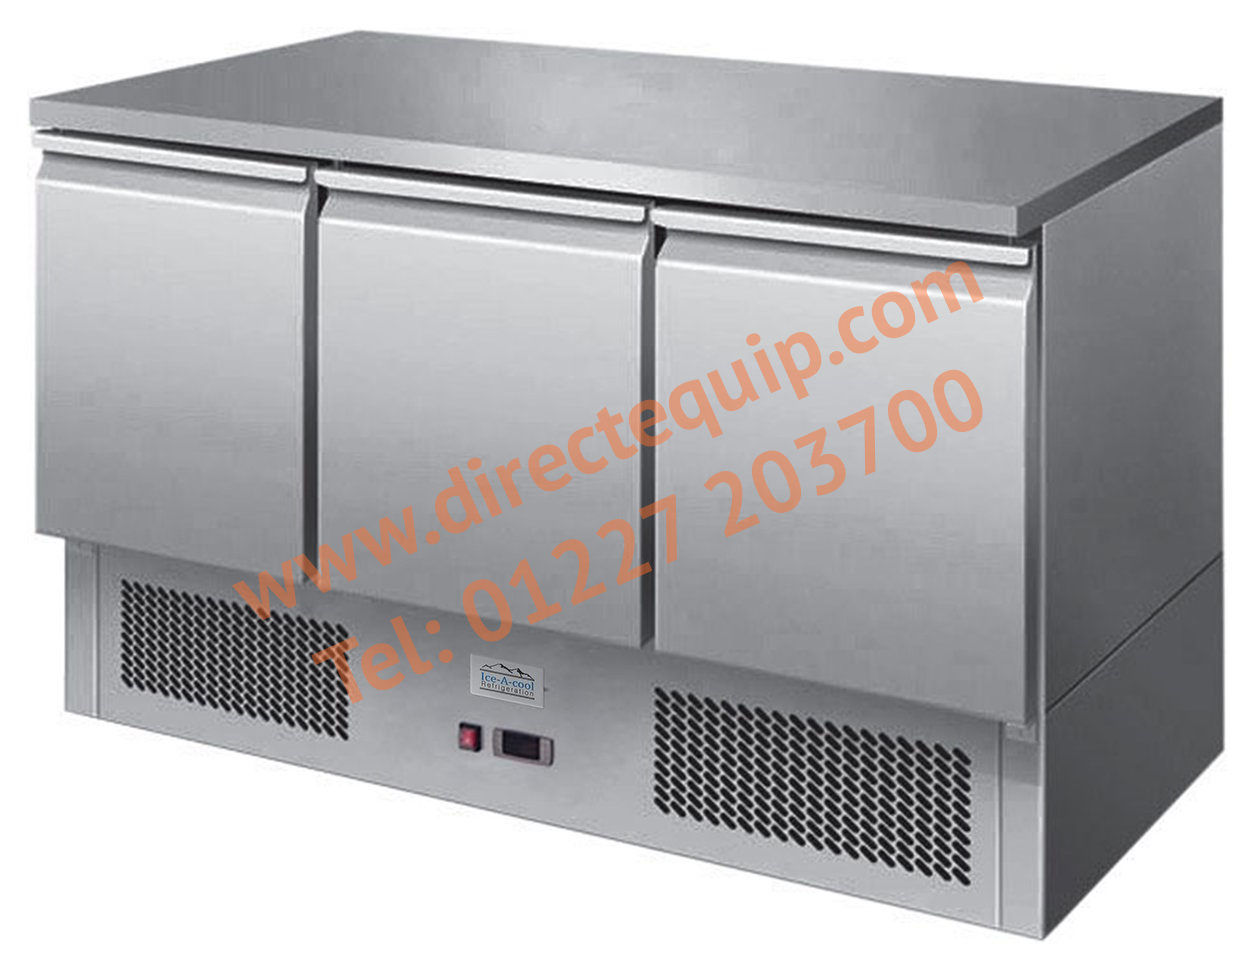 Ice-A-Cool 3 Door Counter Refrigeration W1365mm ICE3851GR